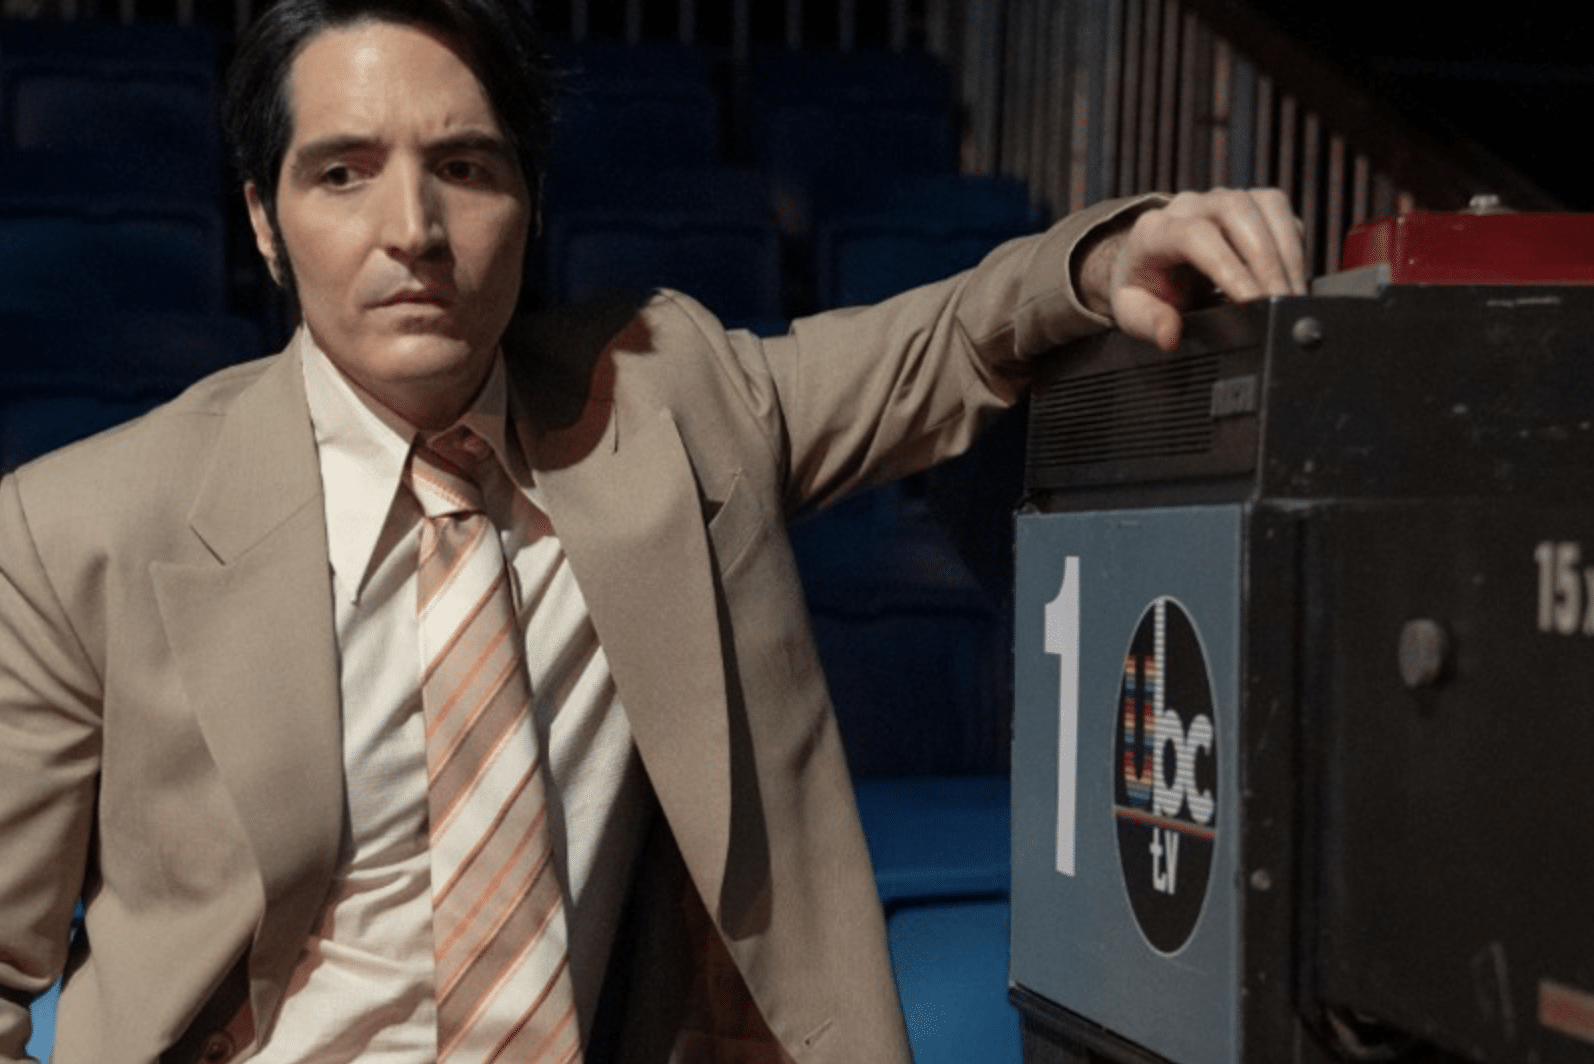 Jack Delroy (played by David Dastmalchian) leans on a studio camera pondering his life choices.